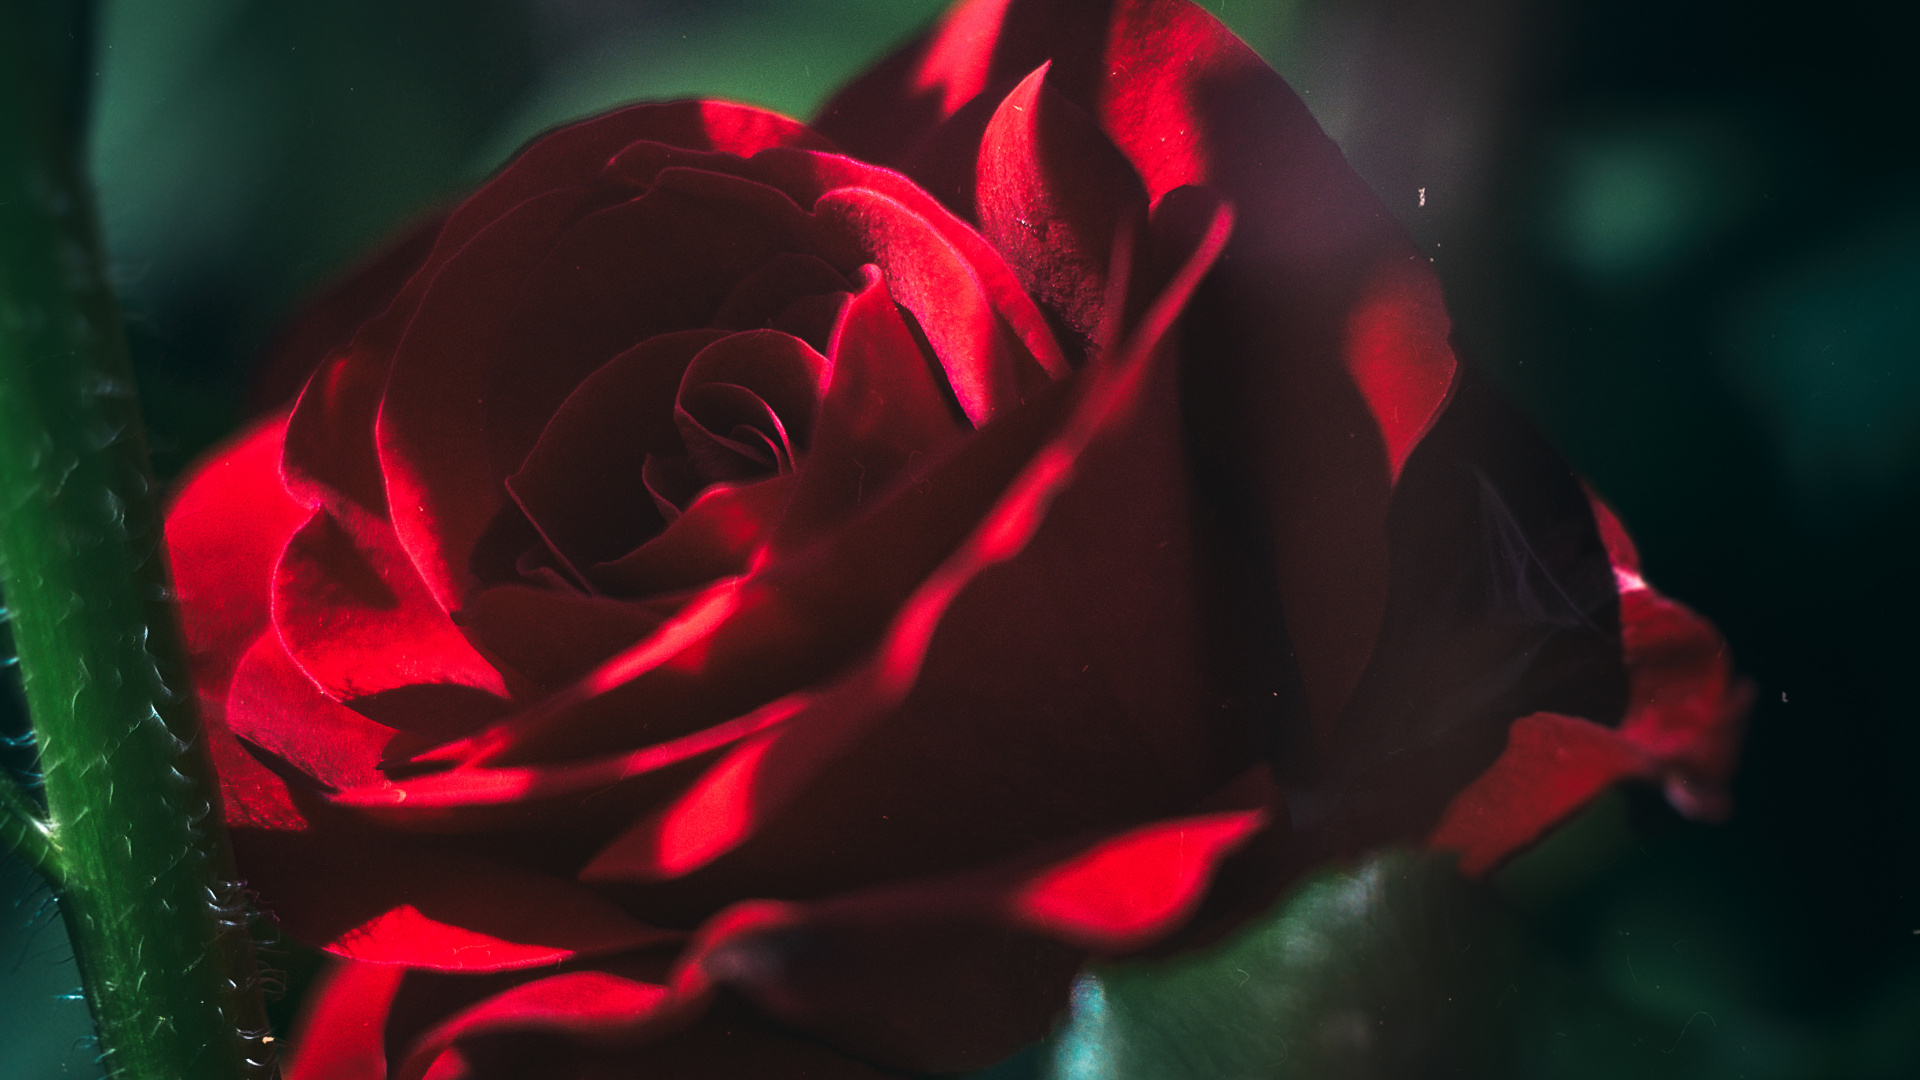 Red Rose in Bloom in Close up Photography. Wallpaper in 1920x1080 Resolution